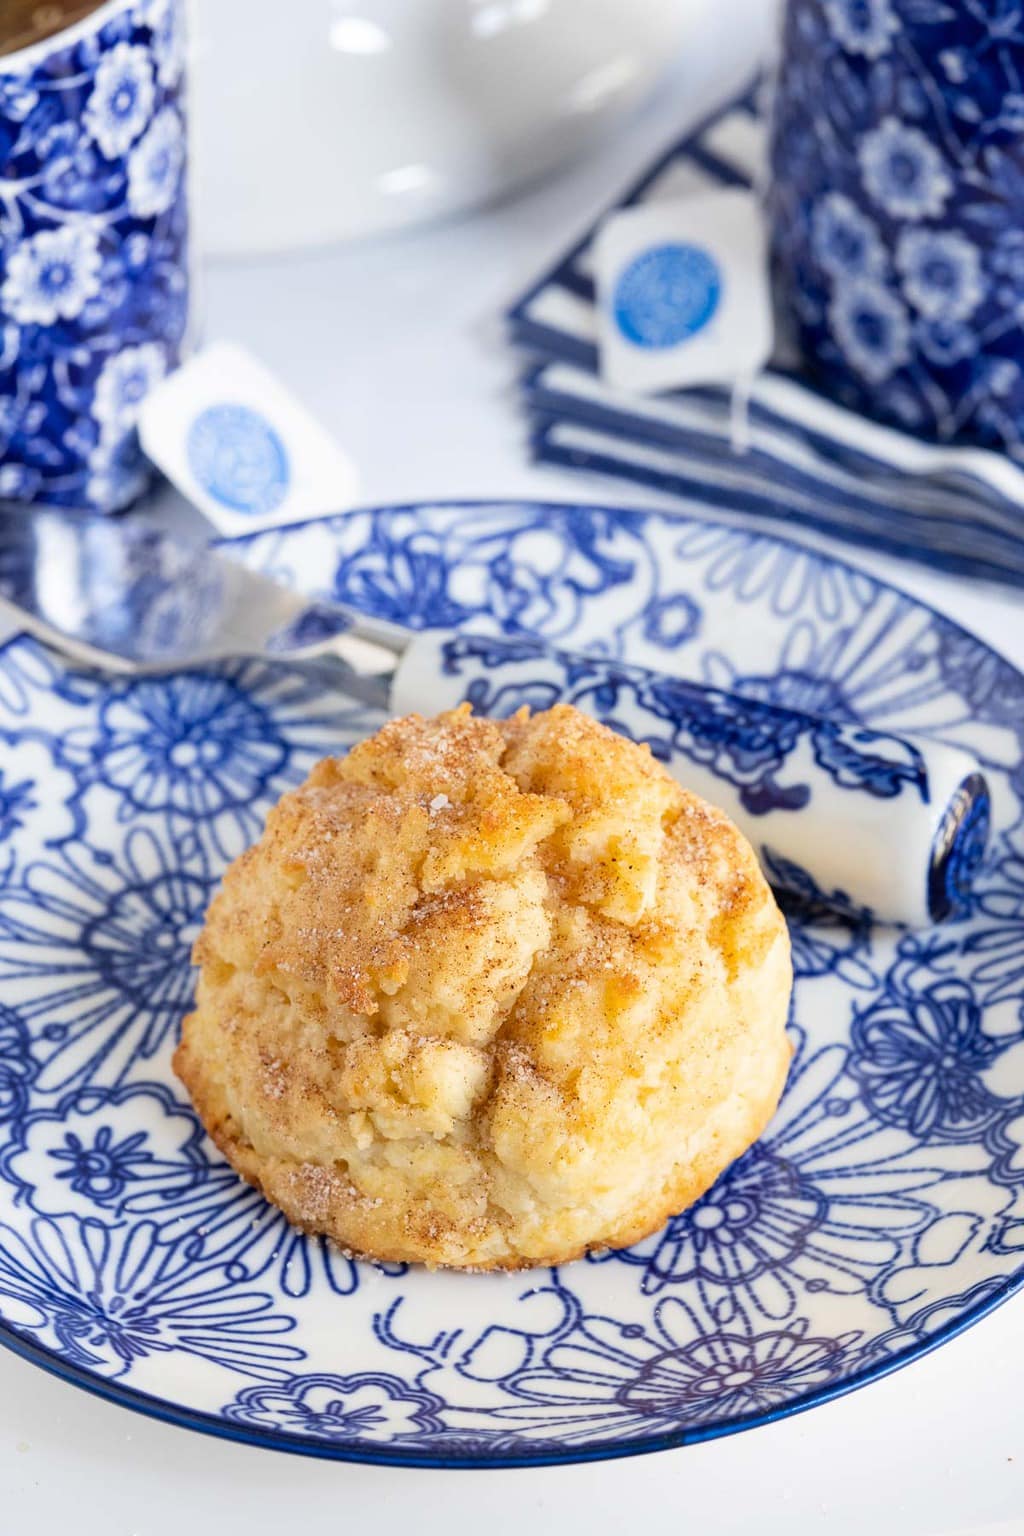 Vertical photo of a Ridiculously Easy Snickerdoodle Scone on a blue and white patterned serving plate.